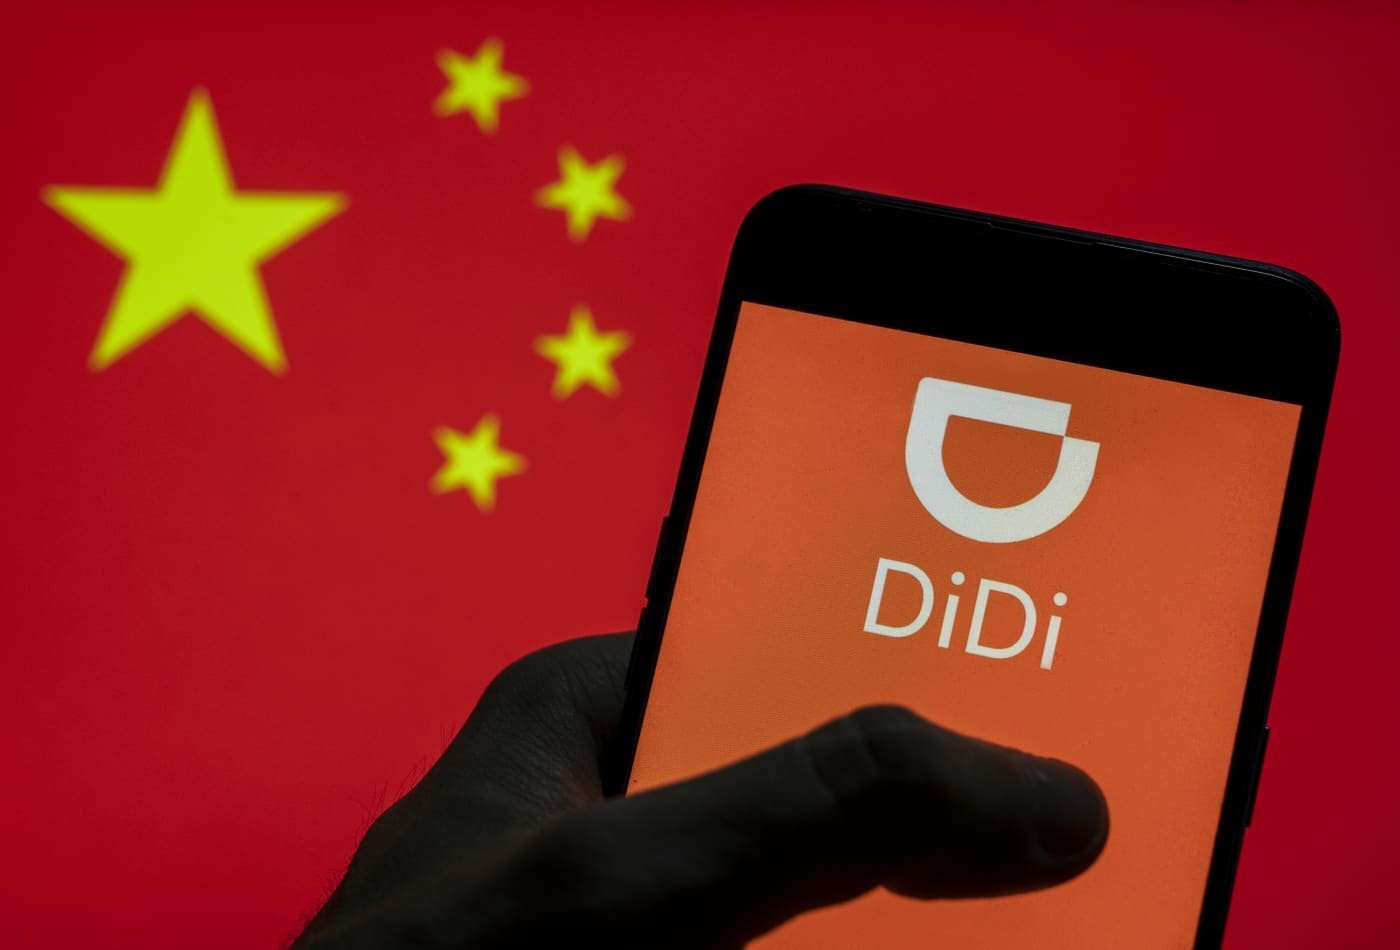 China Cracksdown on DiDi, Launches Cybersecurity Probe Into Ride-Hailing Giant